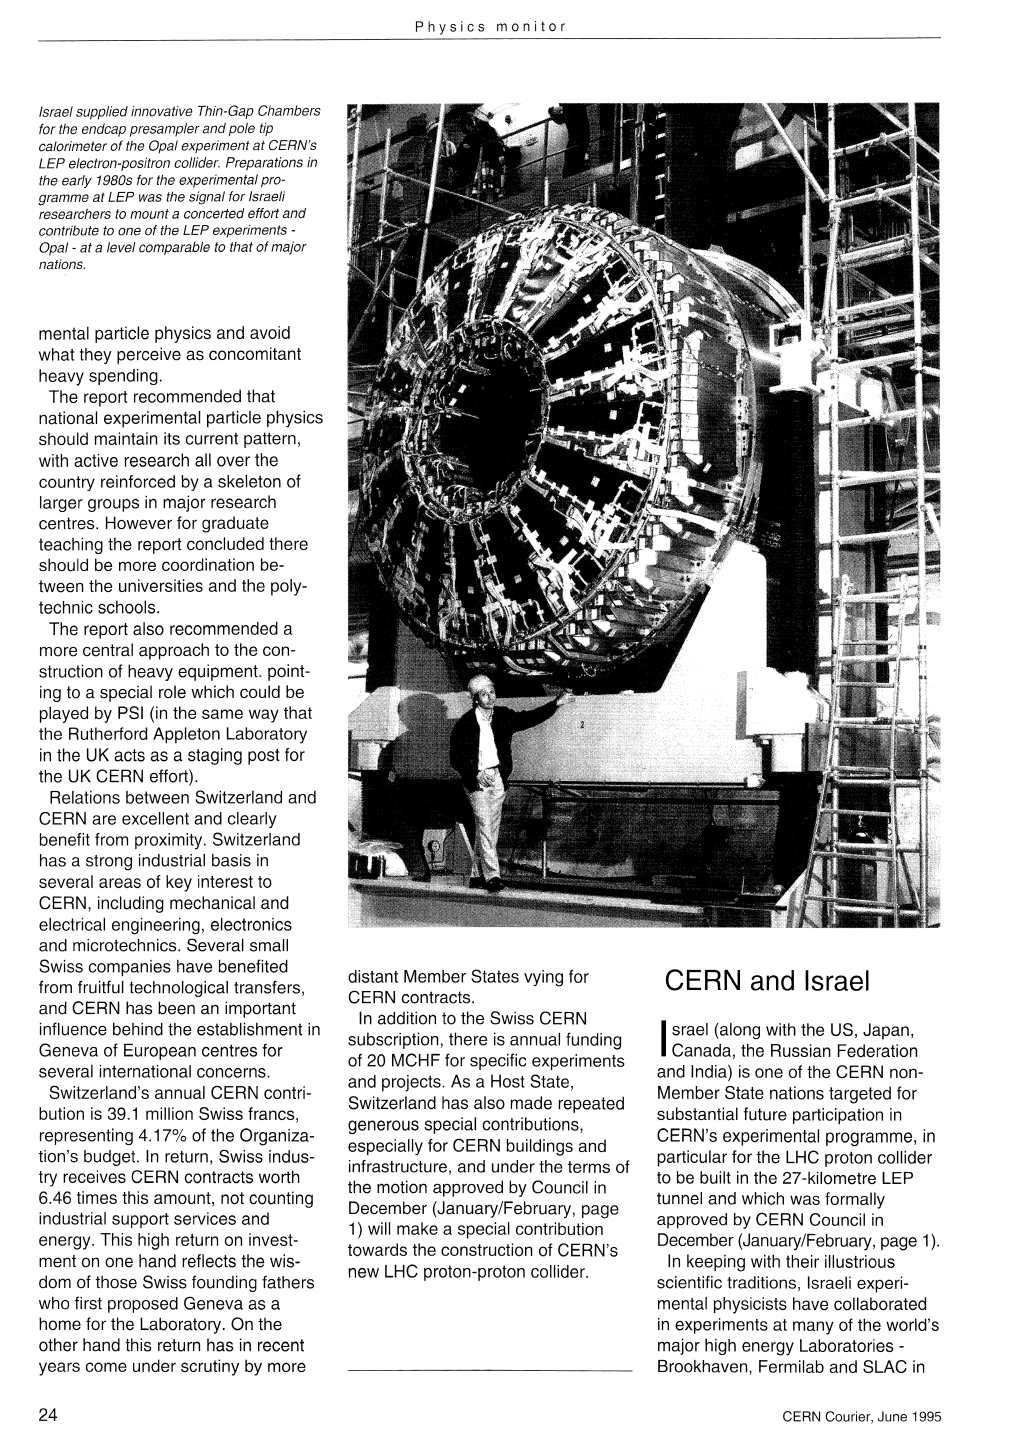 CERN and Israel CERN Contracts